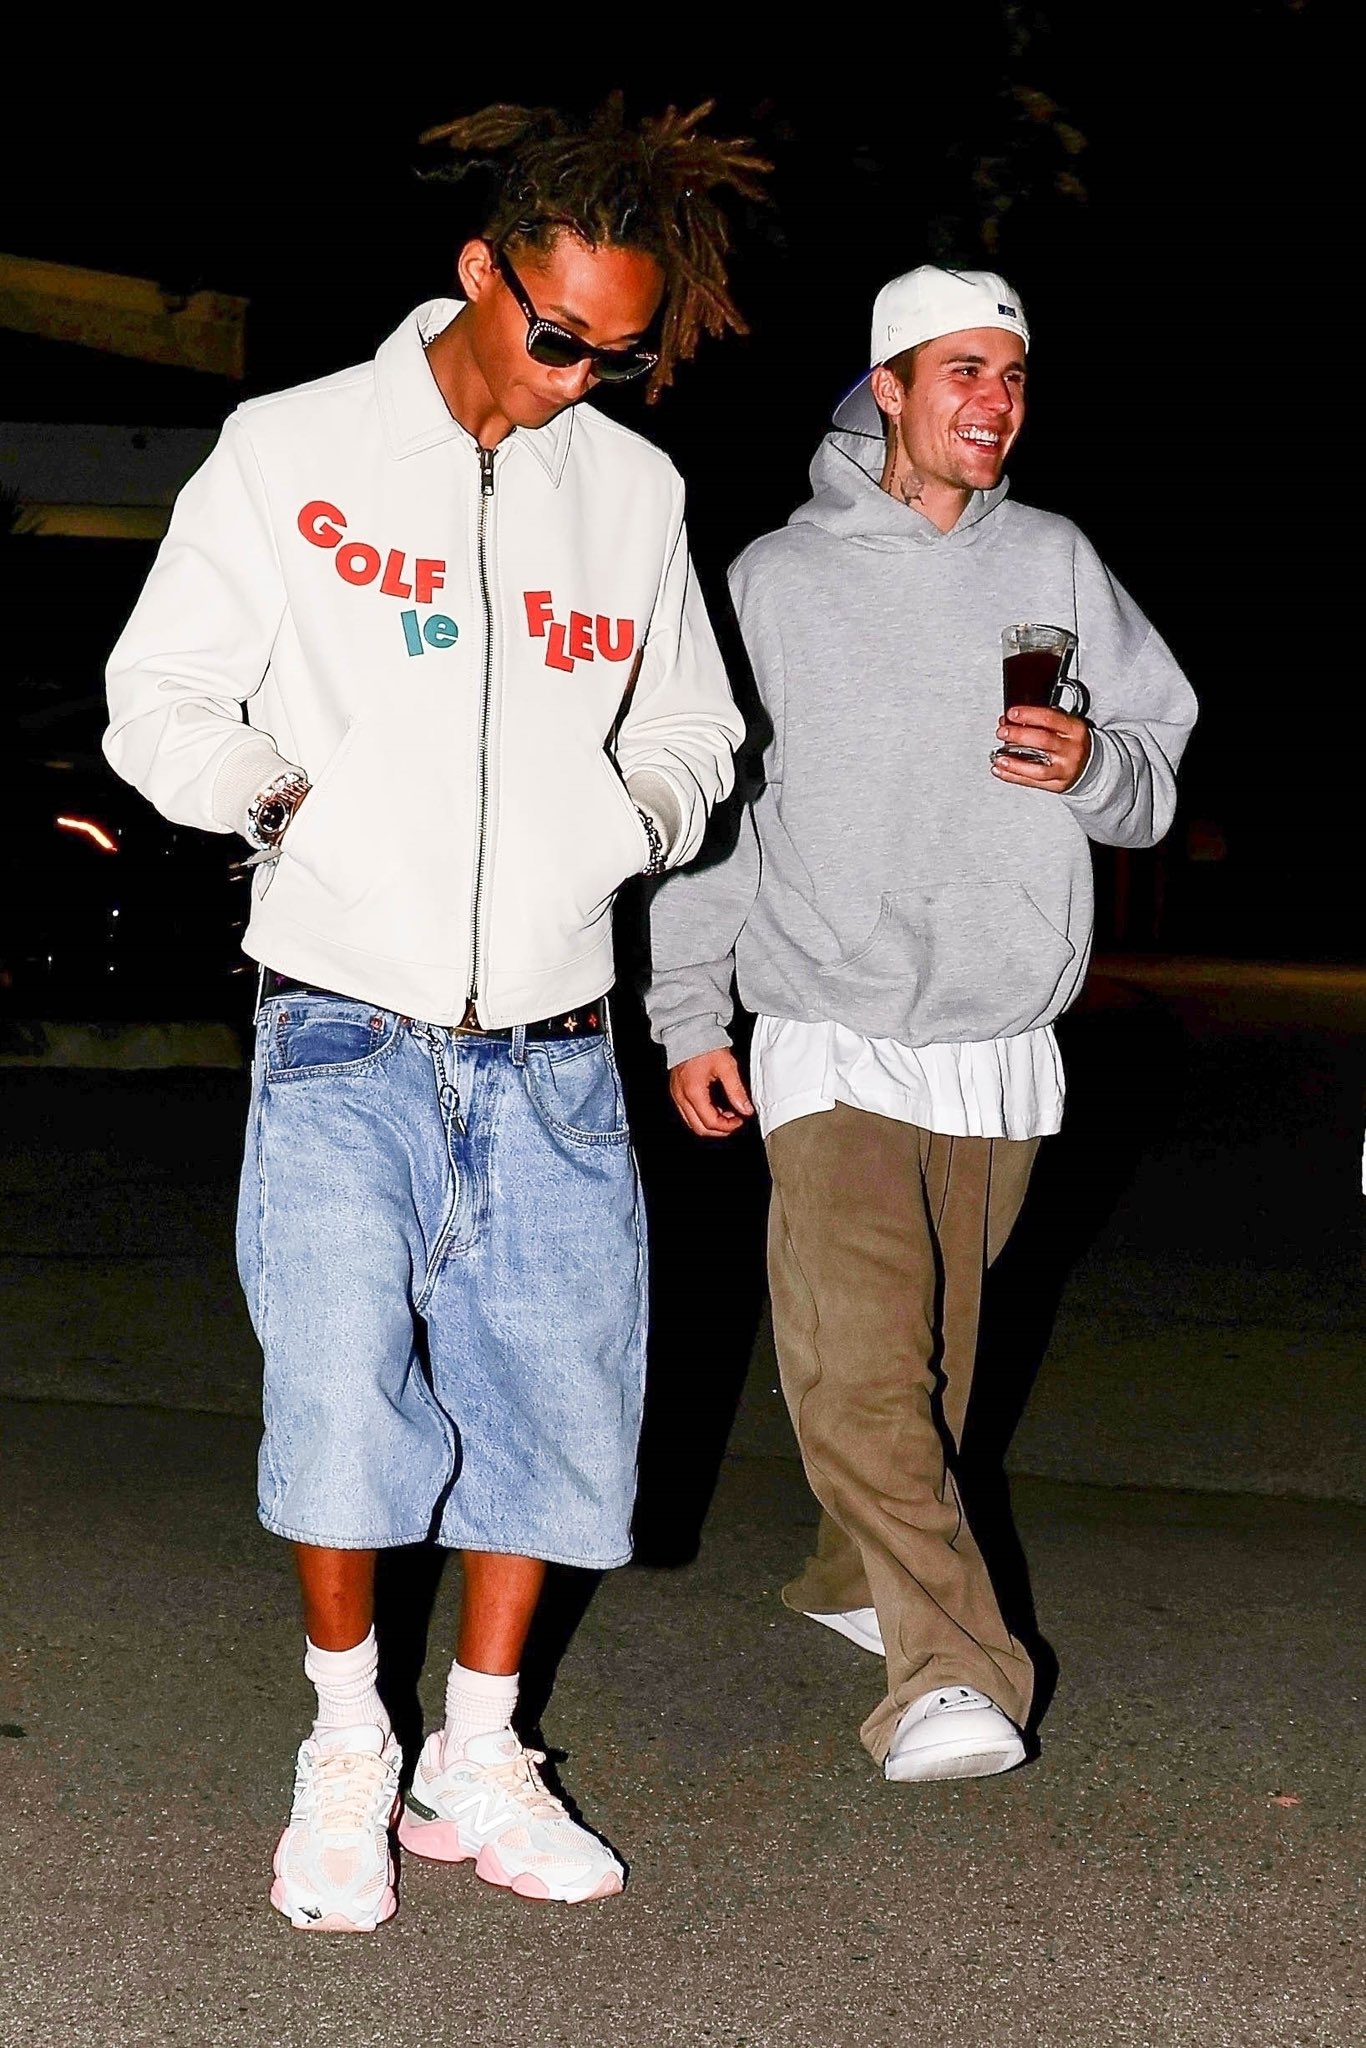 Justin Bieber News on Twitter: "June Justin and Smith spotted at Harry Hudson's birthday in Los https://t.co/2s0wZw7qli" / Twitter